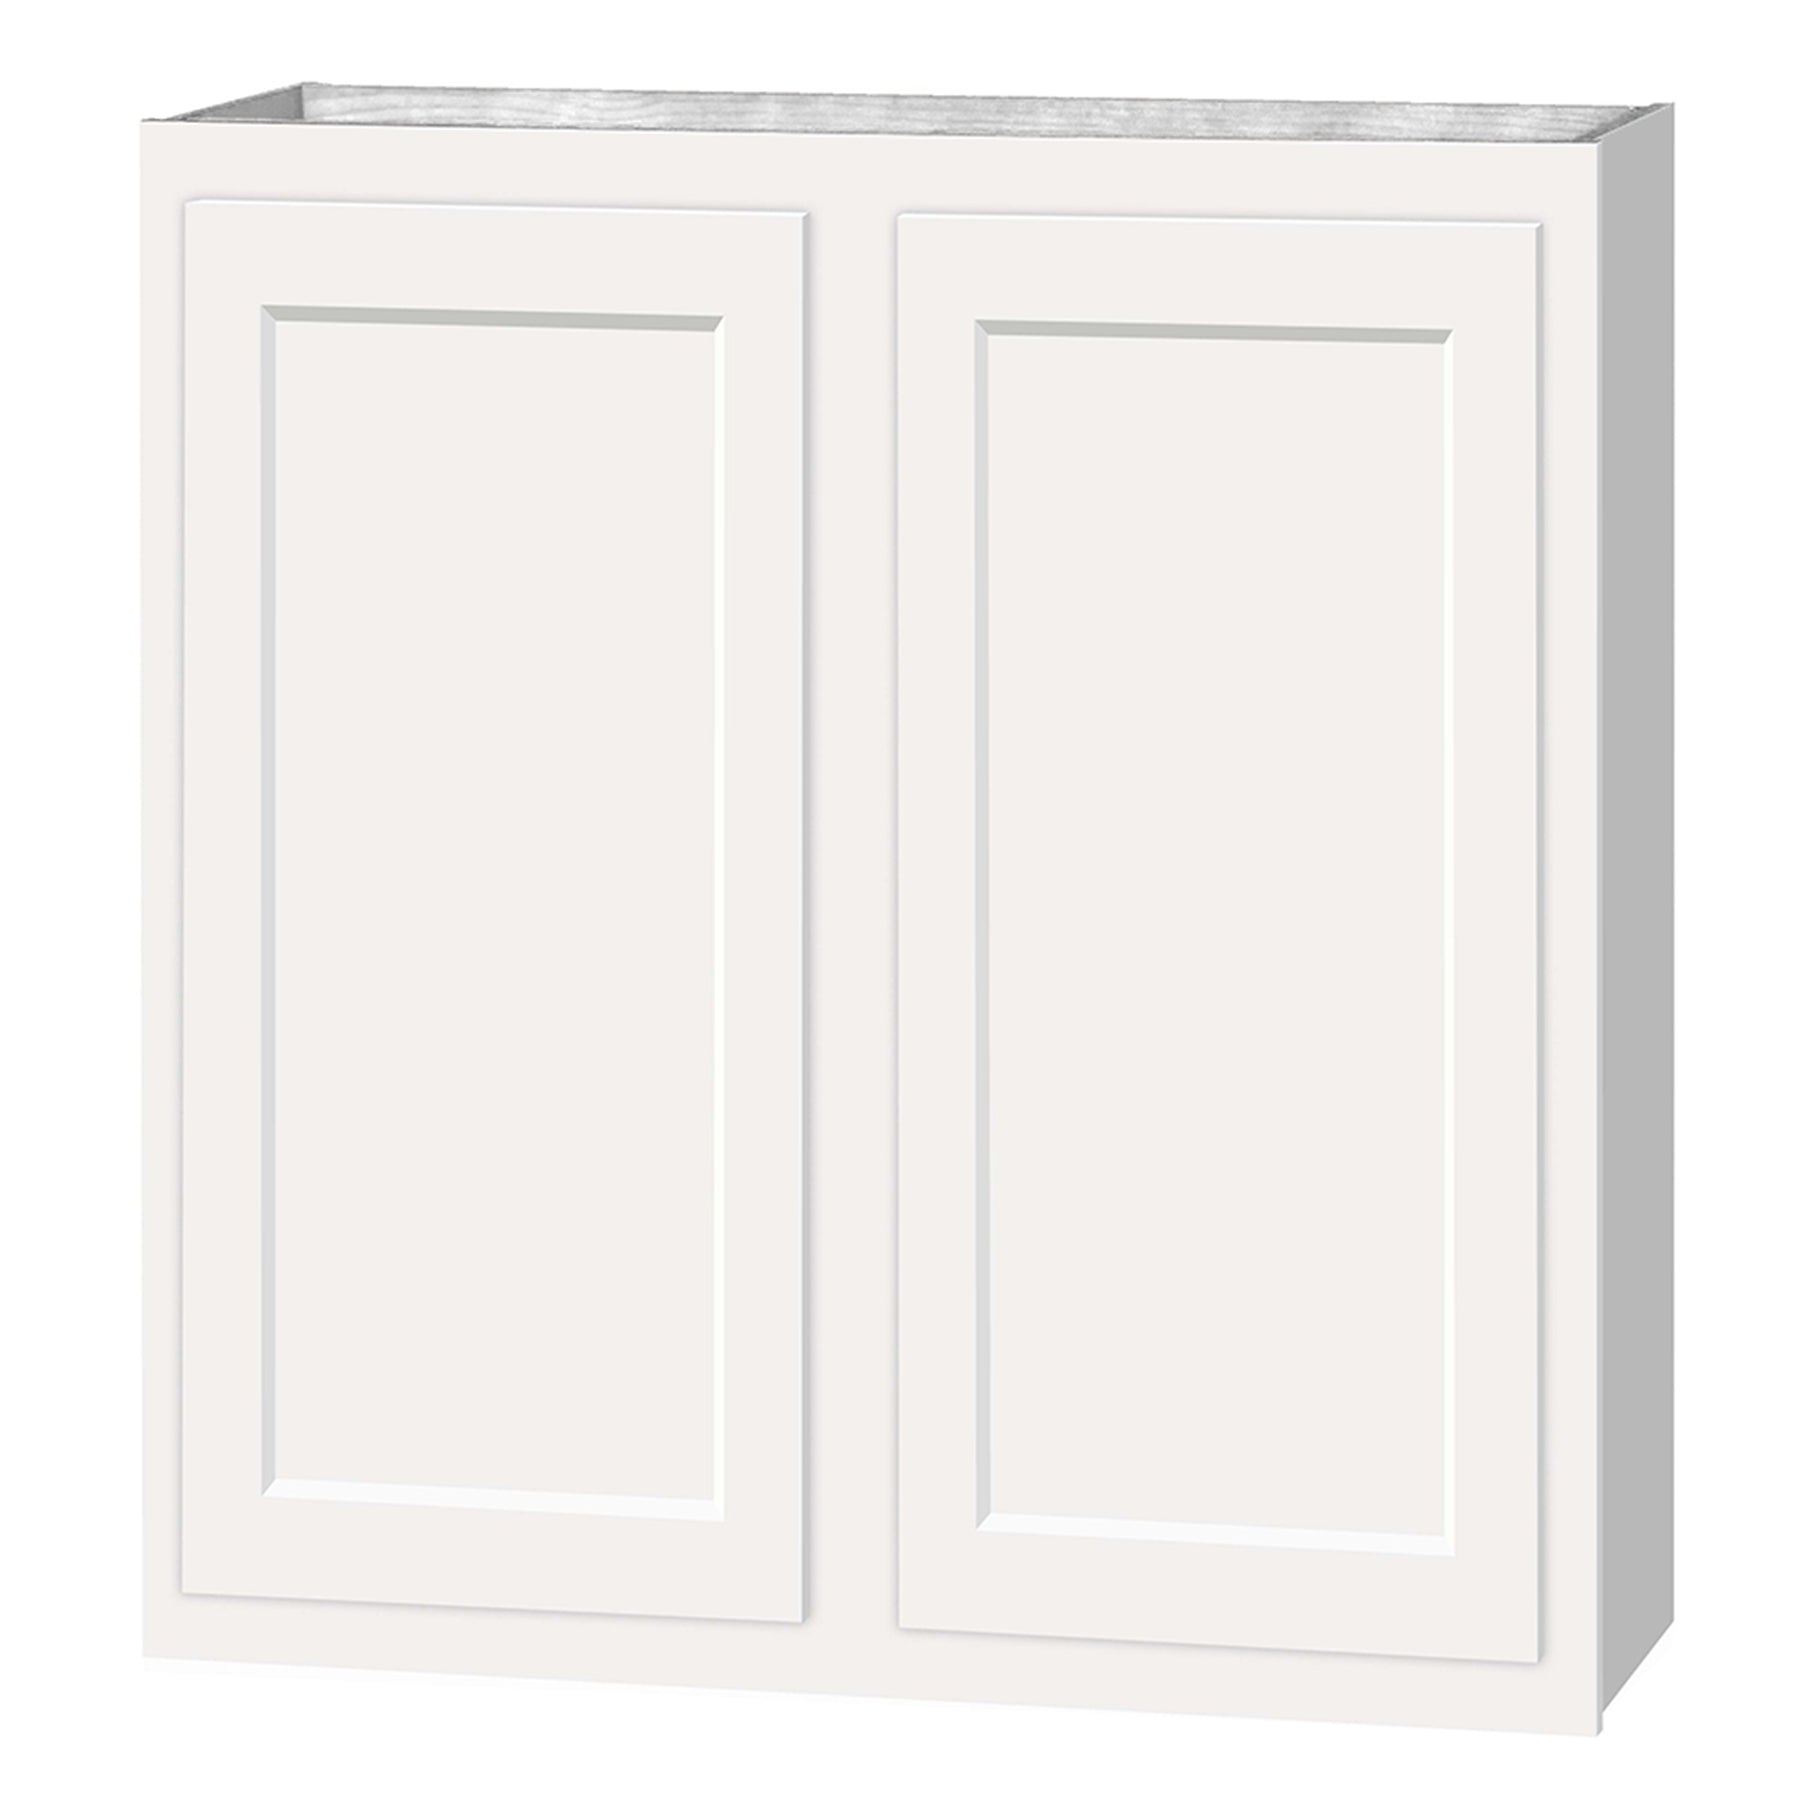 36 inch Wall Cabinets - Dwhite Shaker - 36 Inch W x 36 Inch H x 12 Inch D